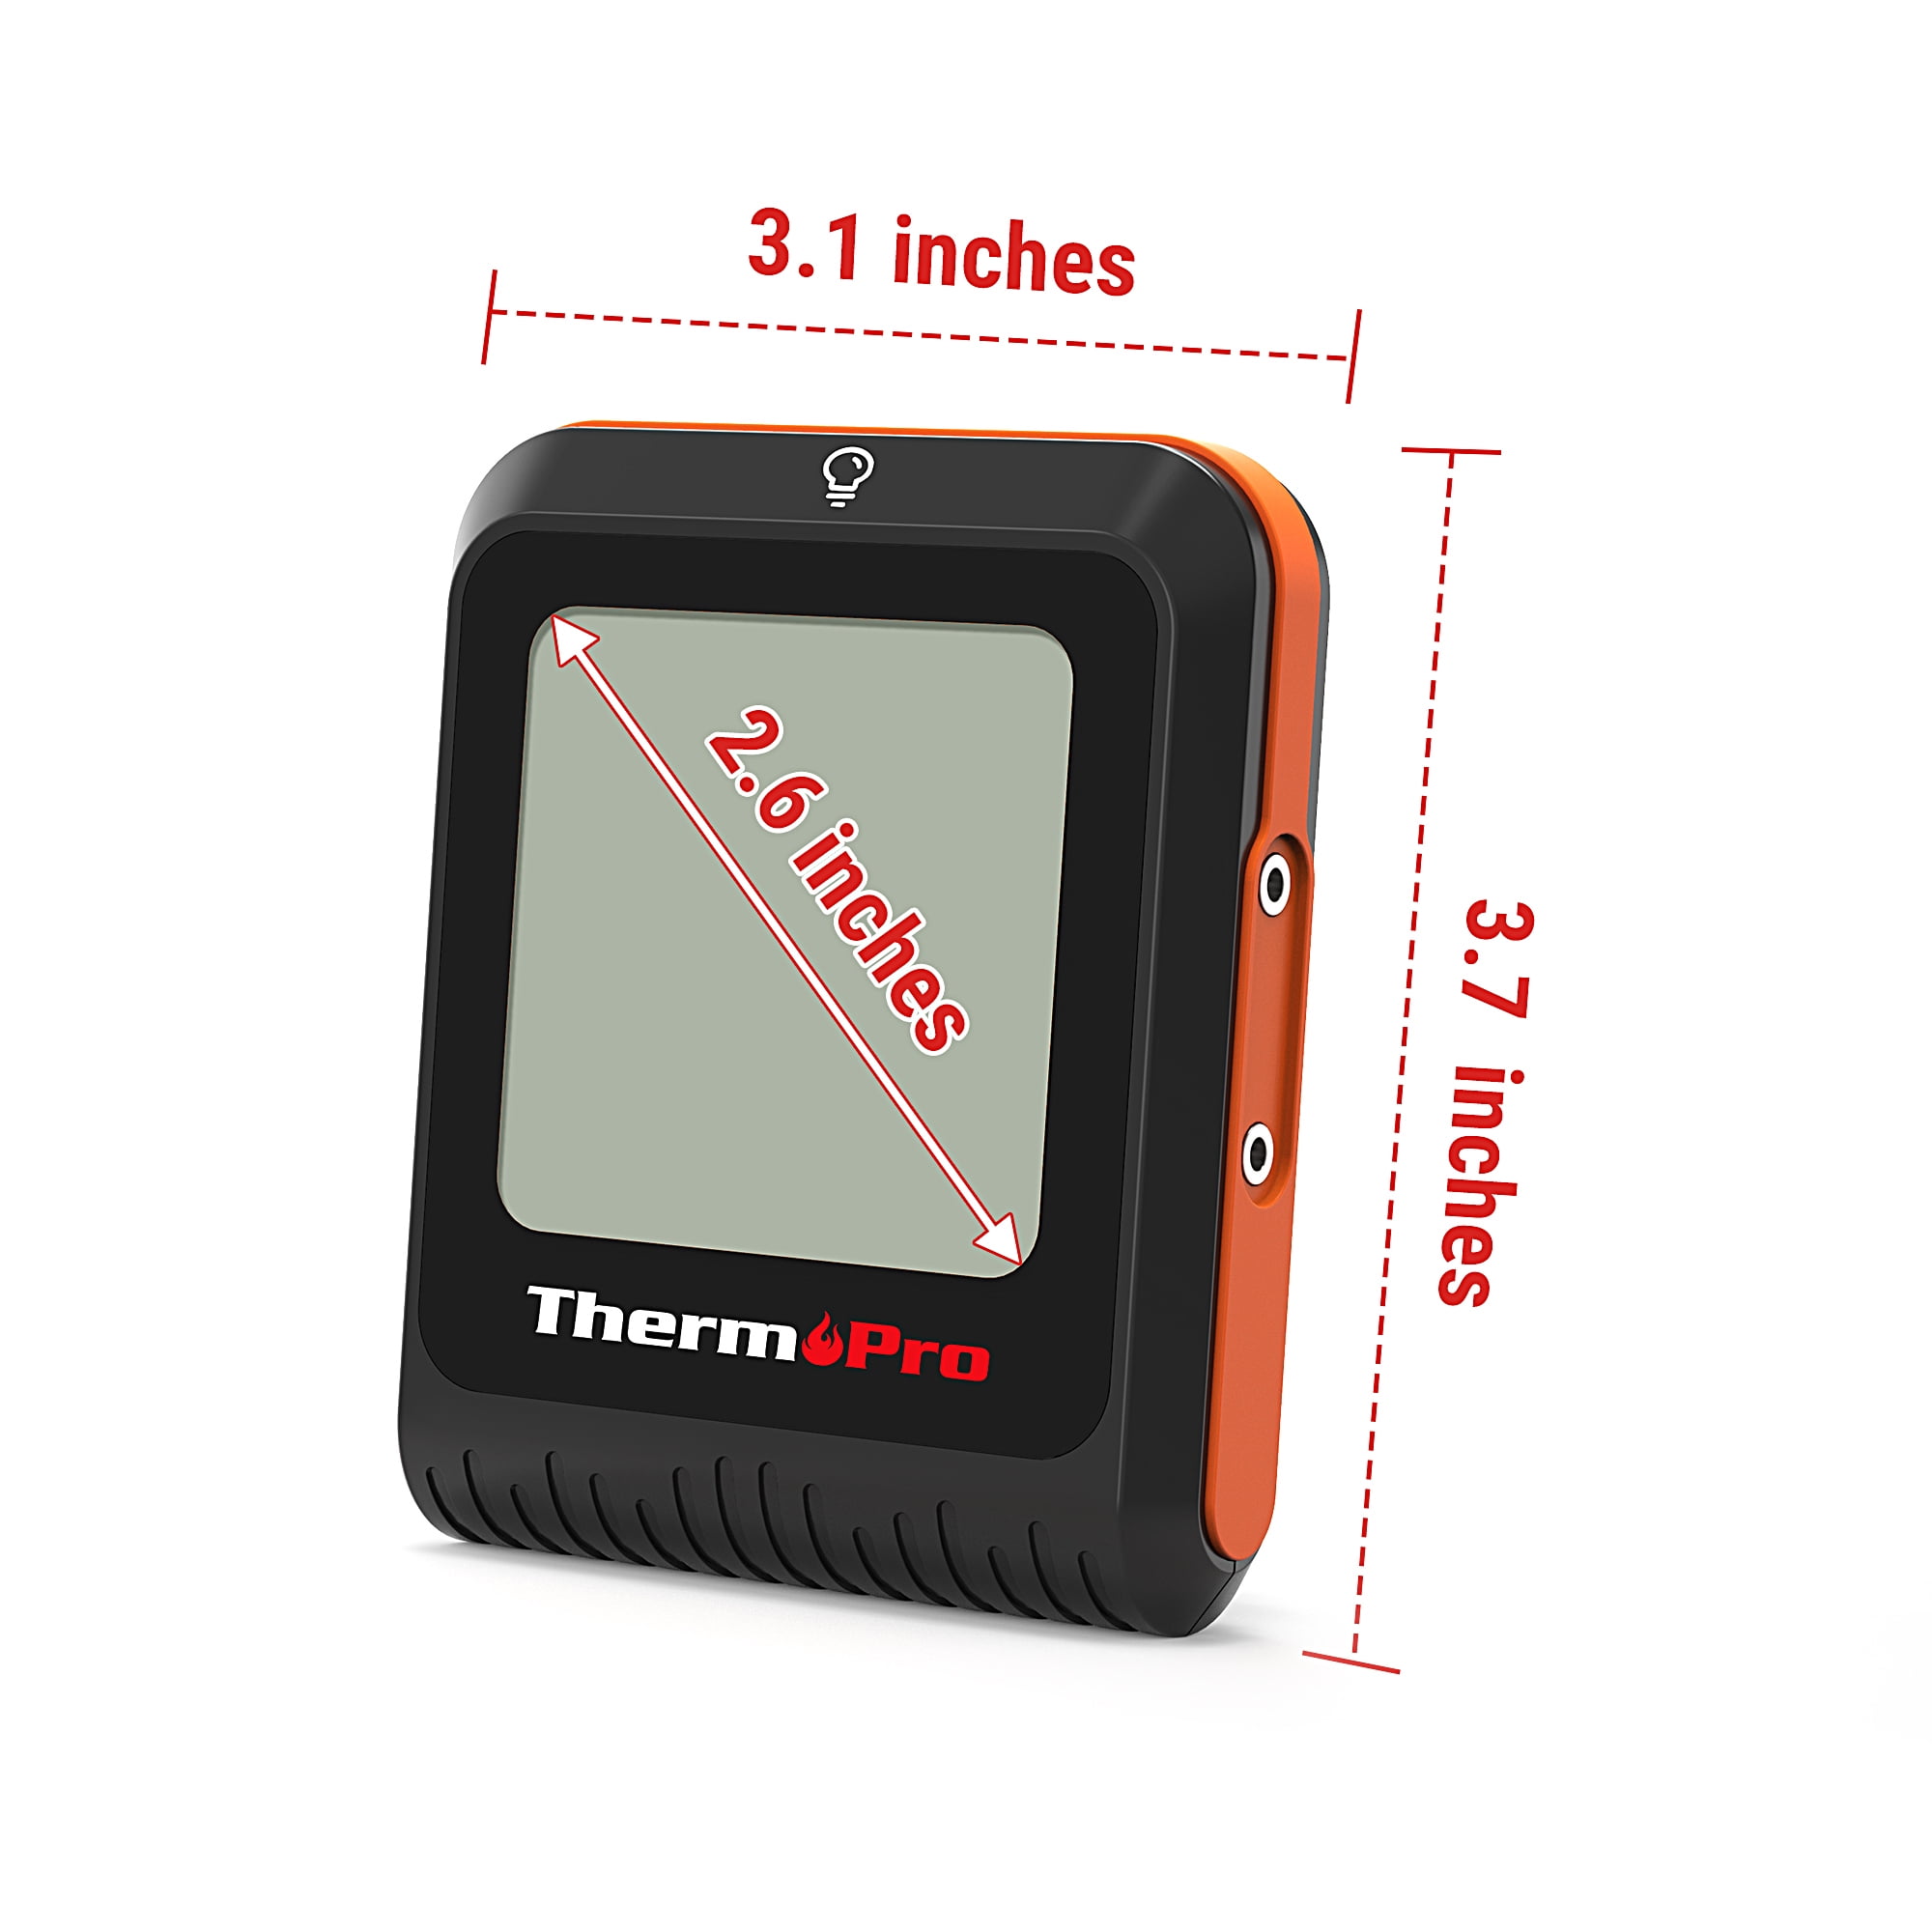 ThermoPro TP-920 500ft Long Range Bluetooth Meat Thermometer Wireless Grill  Thermometer with Dual Probe Smart Rechargeable BBQ Thermometer for